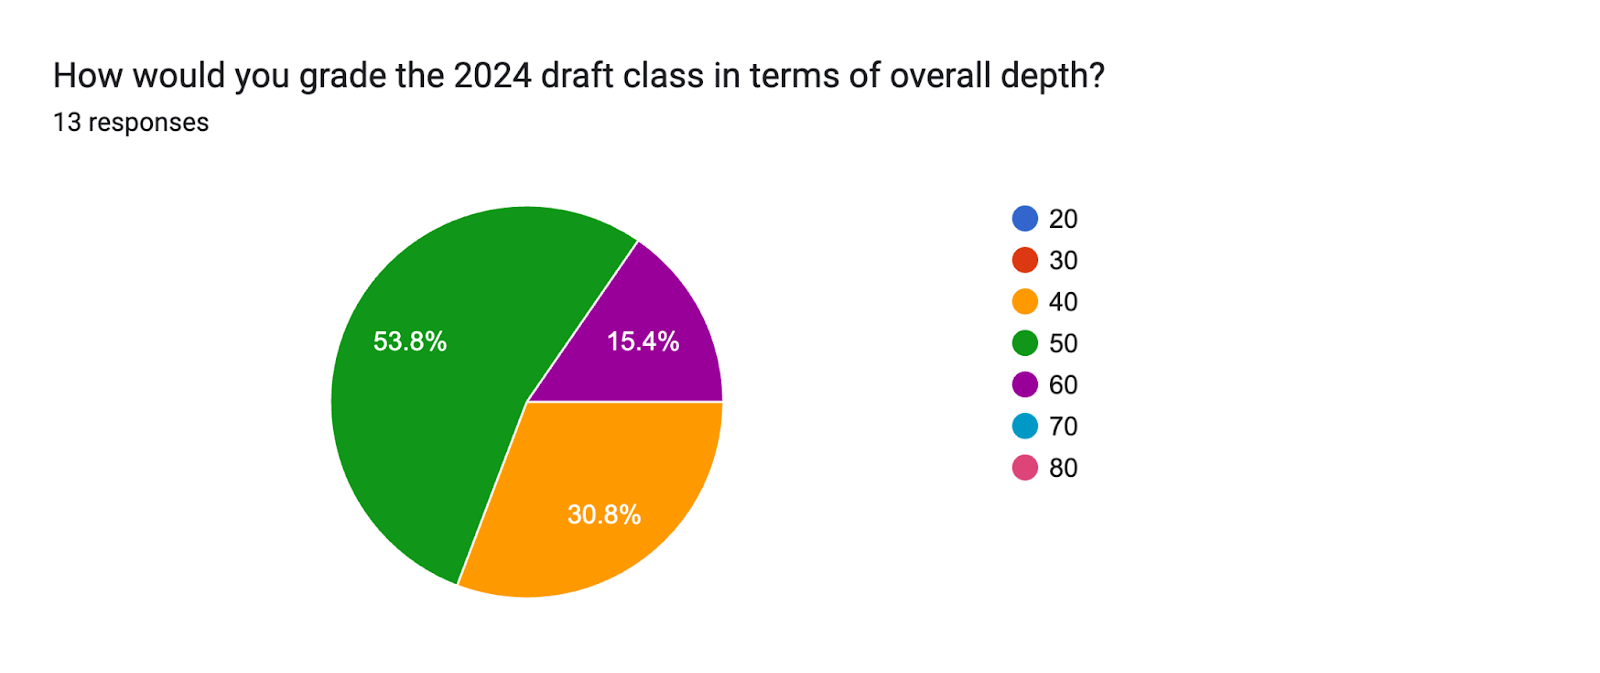 Forms response chart. Question title: How would you grade the 2024 draft class in terms of overall depth?. Number of responses: 13 responses.